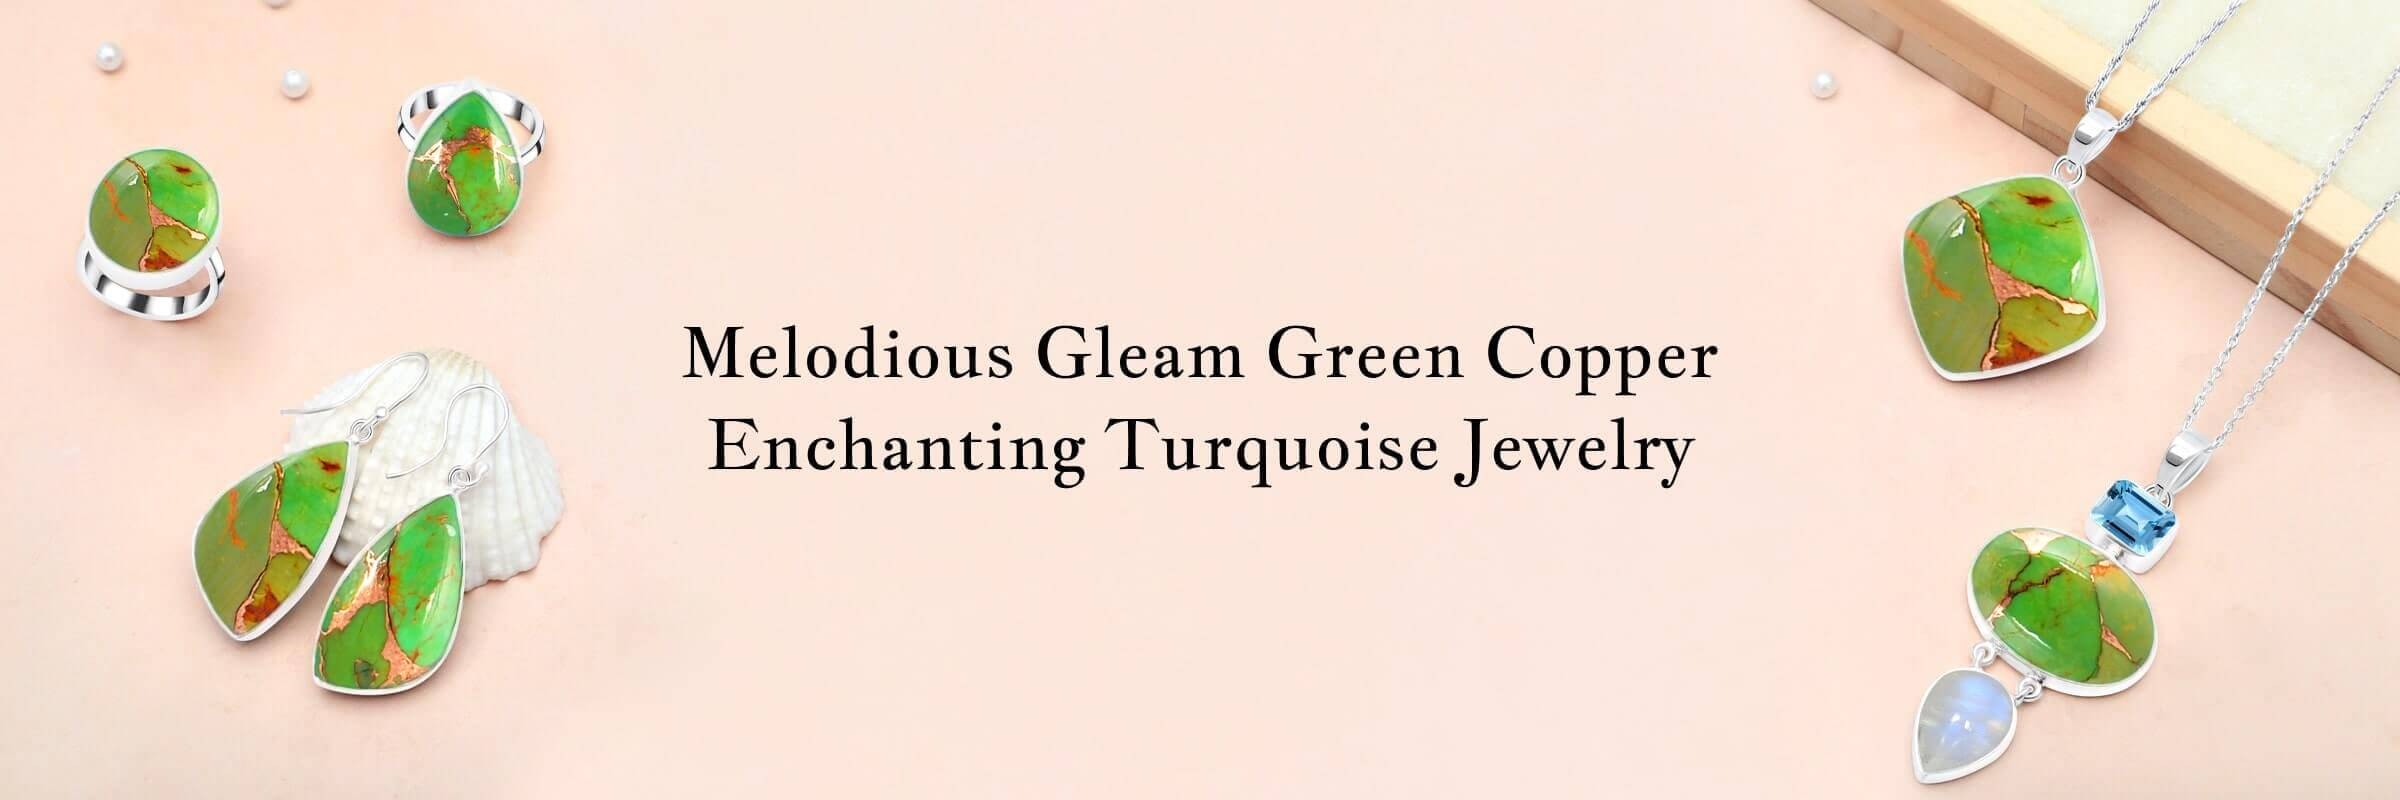 Green Copper Turquoise Jewelry